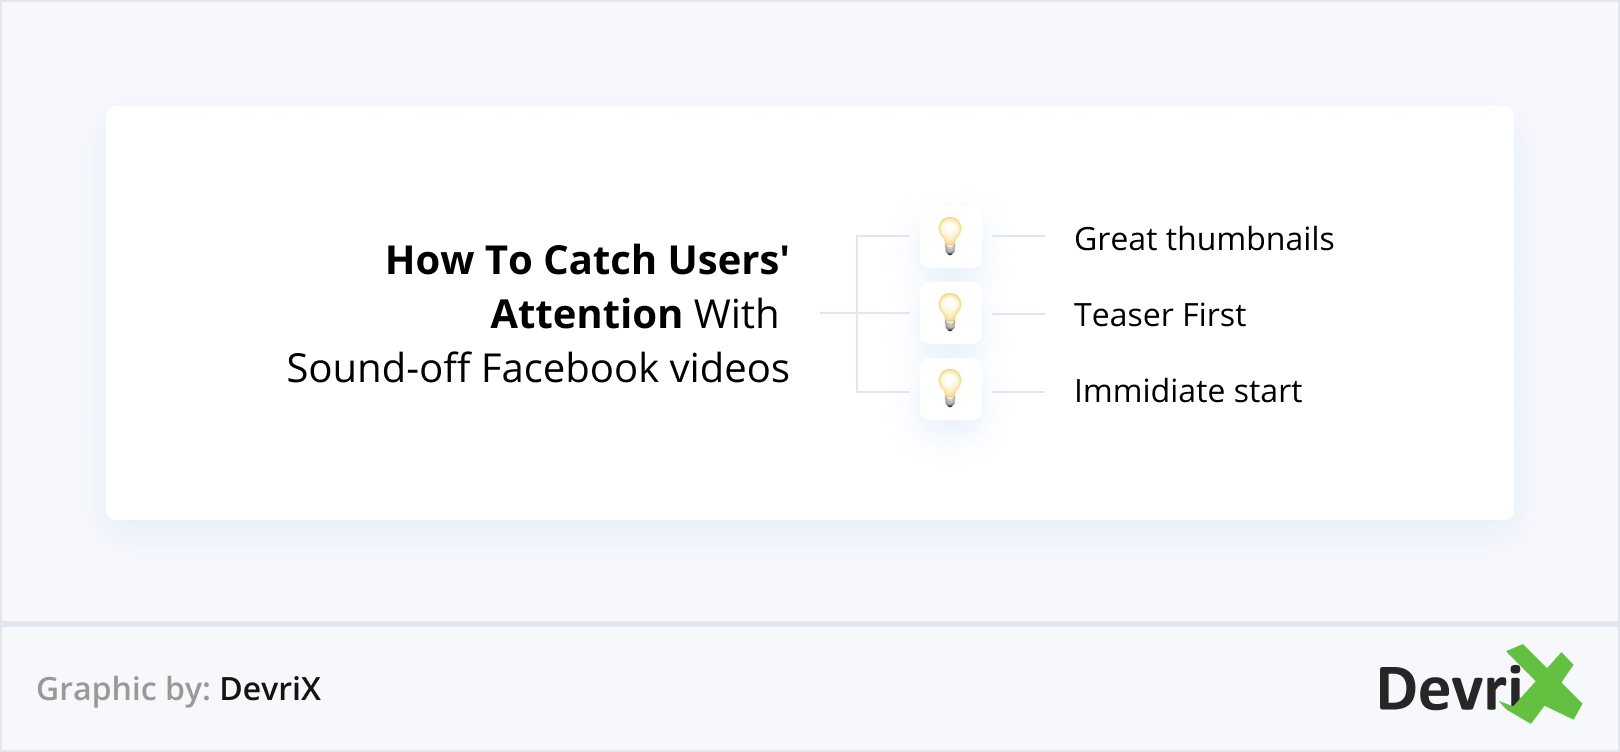 How To Catch Users' Attention With Sound-off Facebook videos